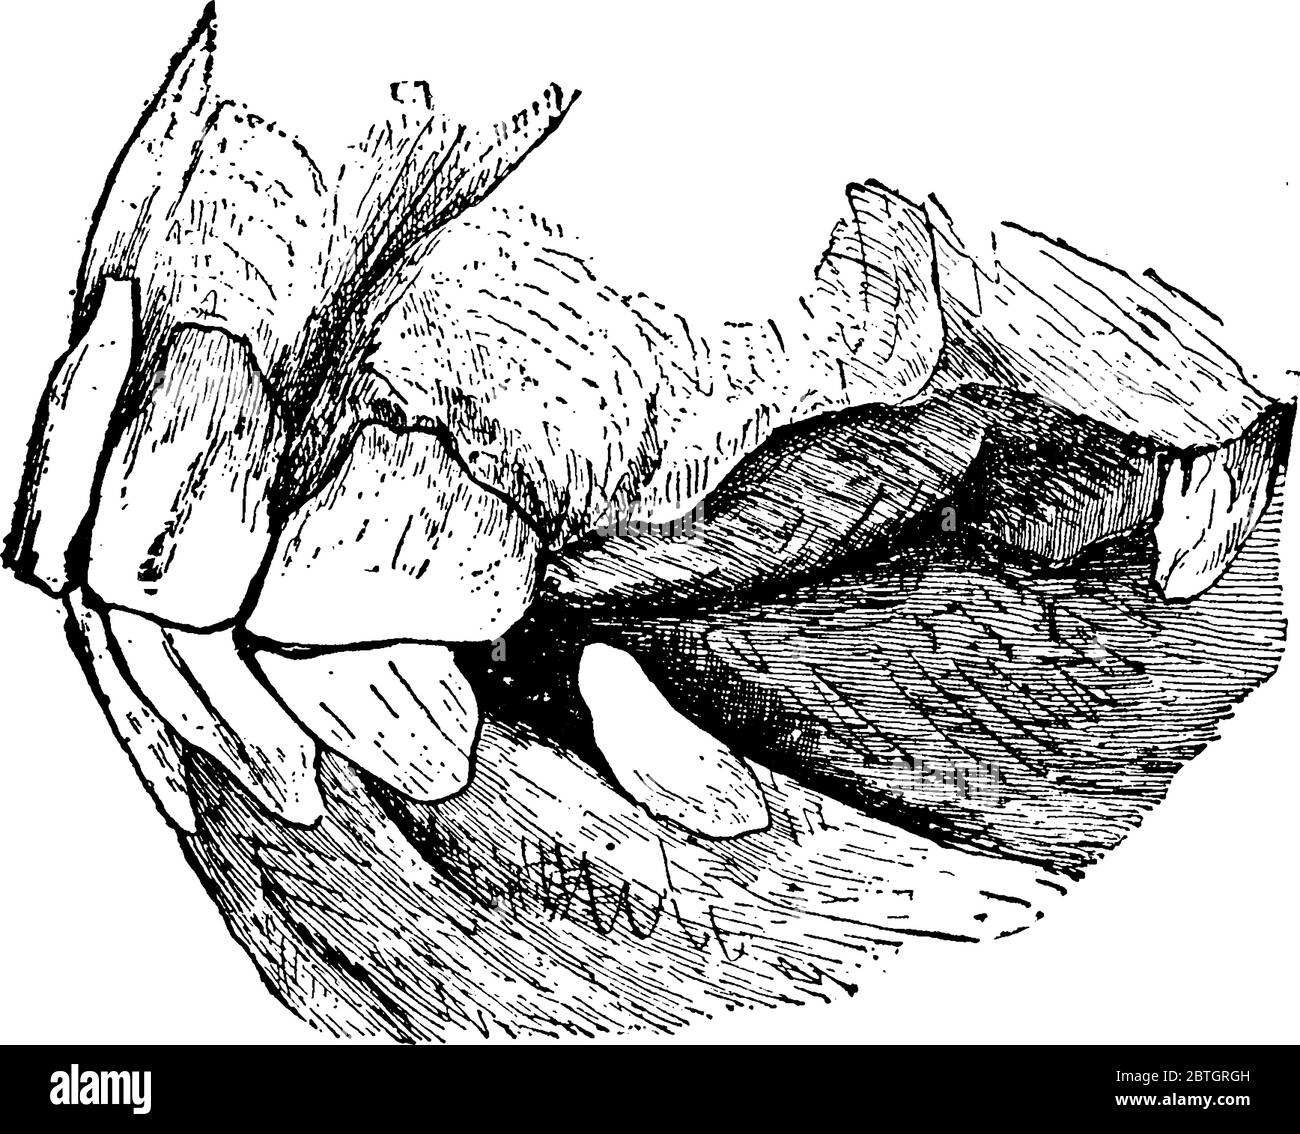 Jaw of young uncastrated male horse (side view)., vintage line drawing or engraving illustration. Stock Vector